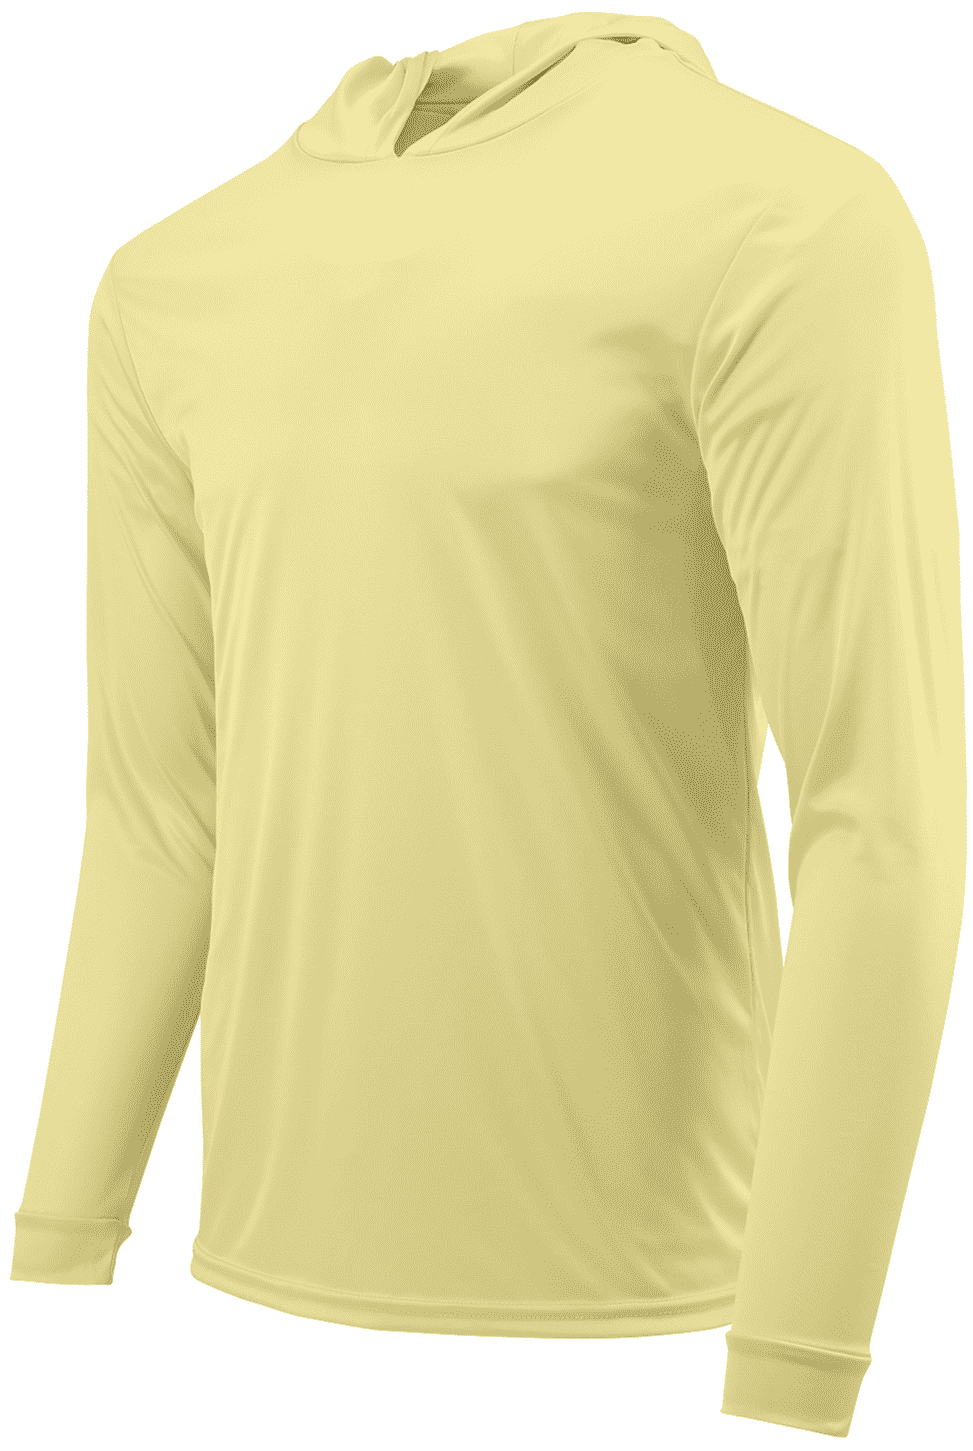 Paragon 220 Adult Long Sleeve Performance Hood - Pale Yellow - HIT a Double - 1